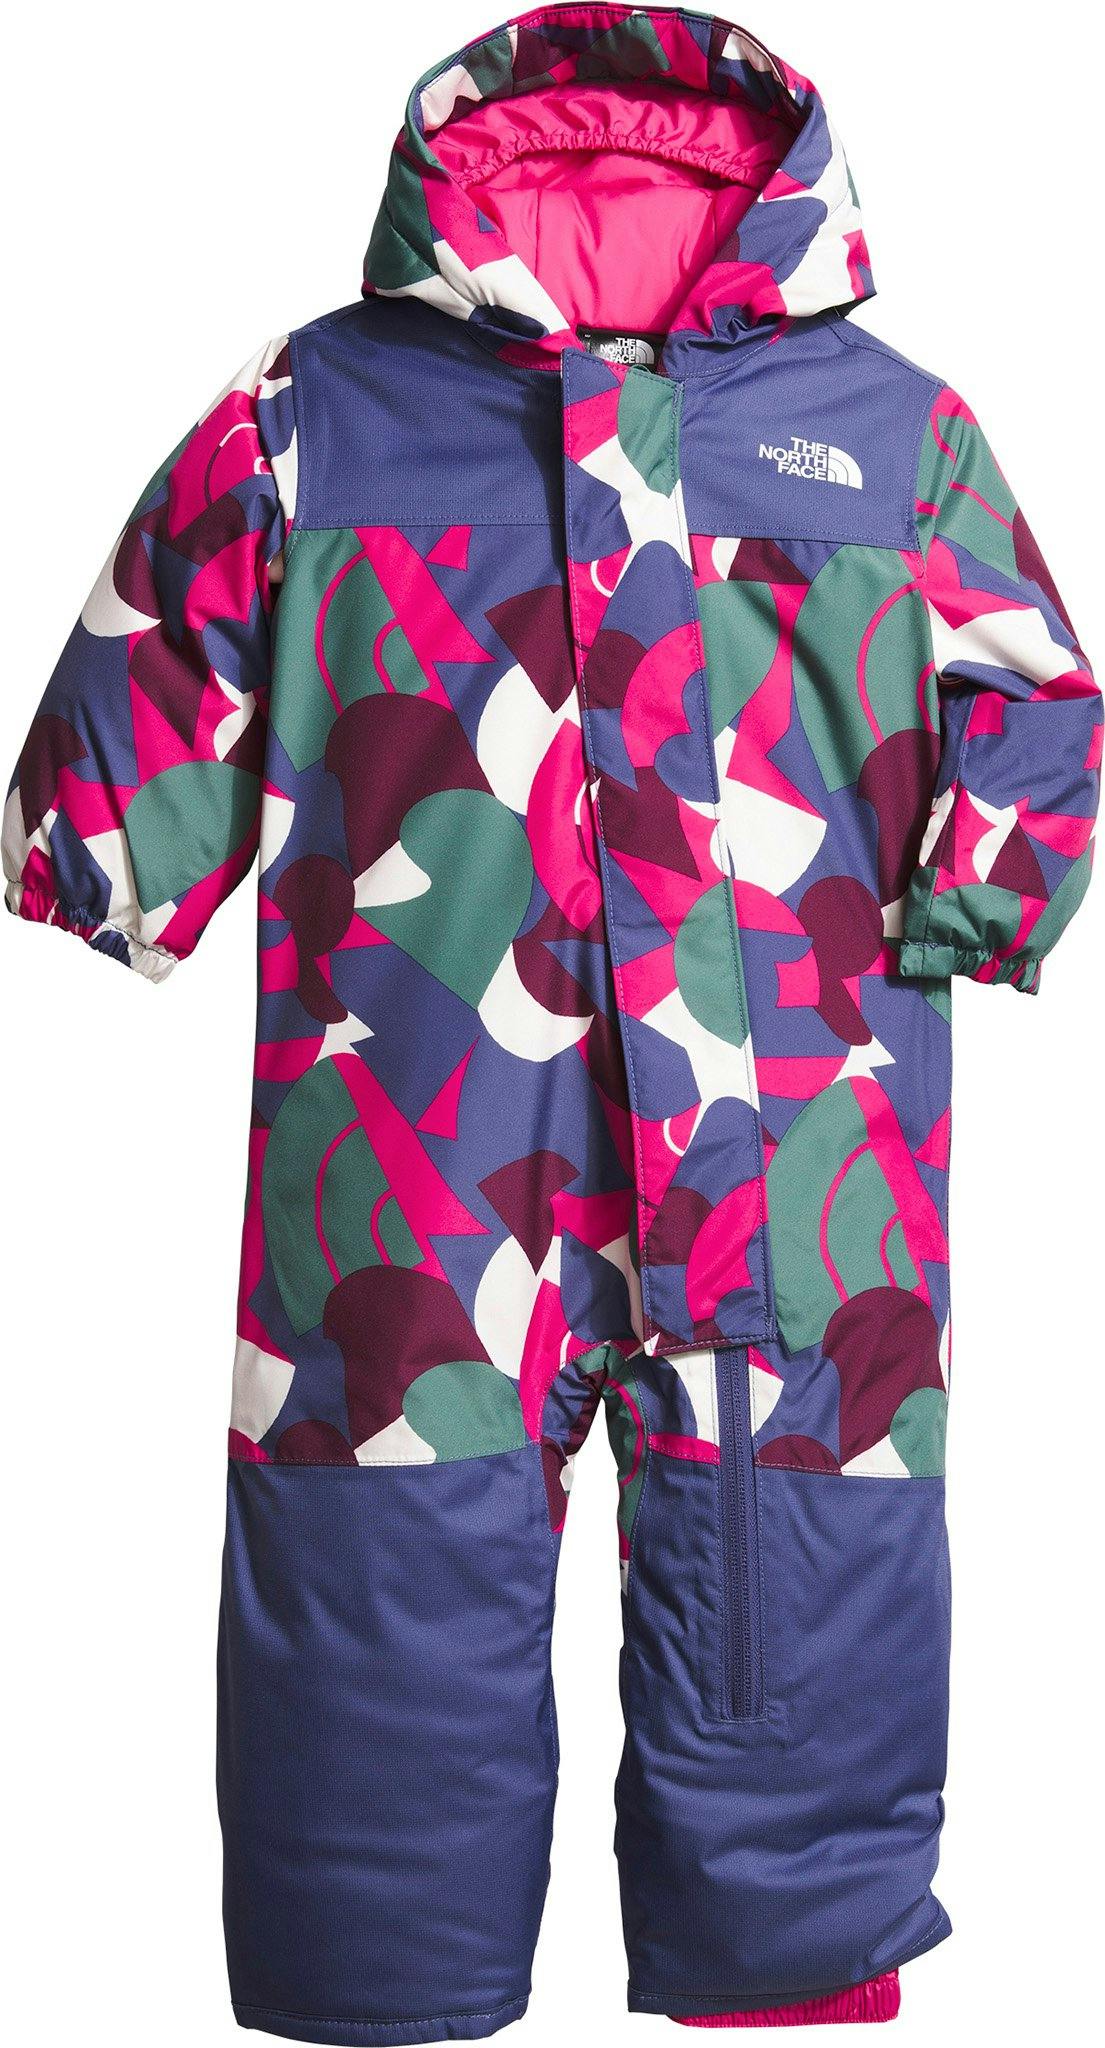 Product image for Freedom Snow Suit - Baby